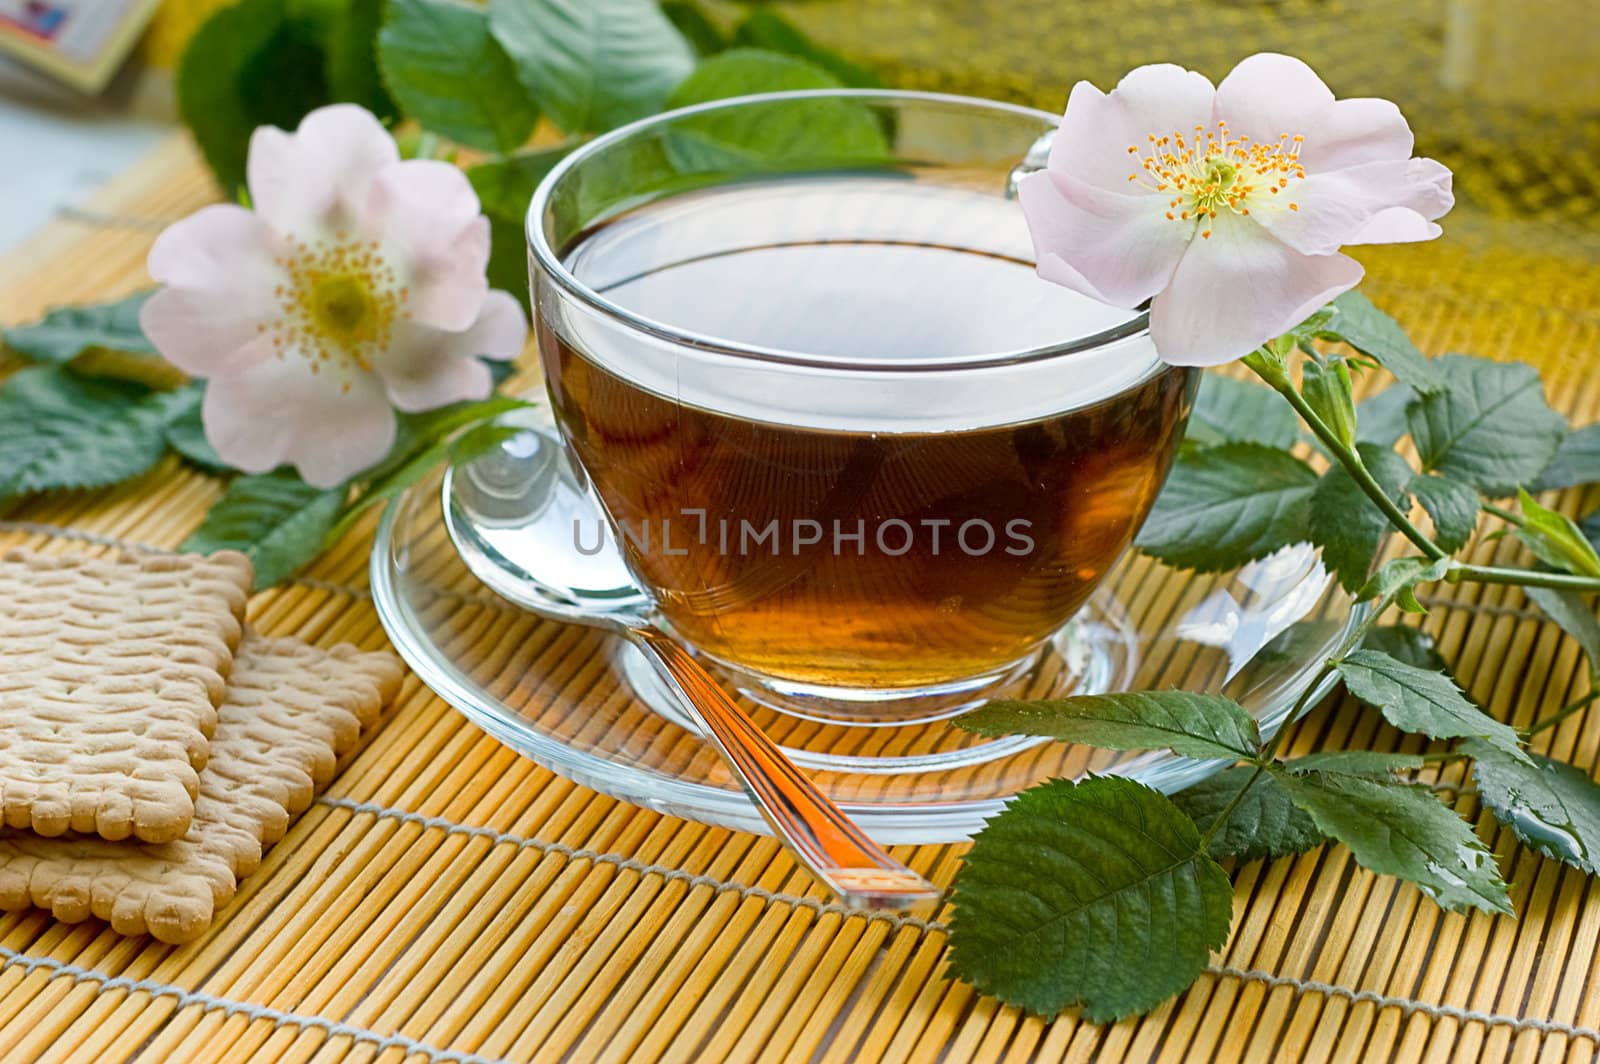 Tea with dog-rose blossom by Angel_a